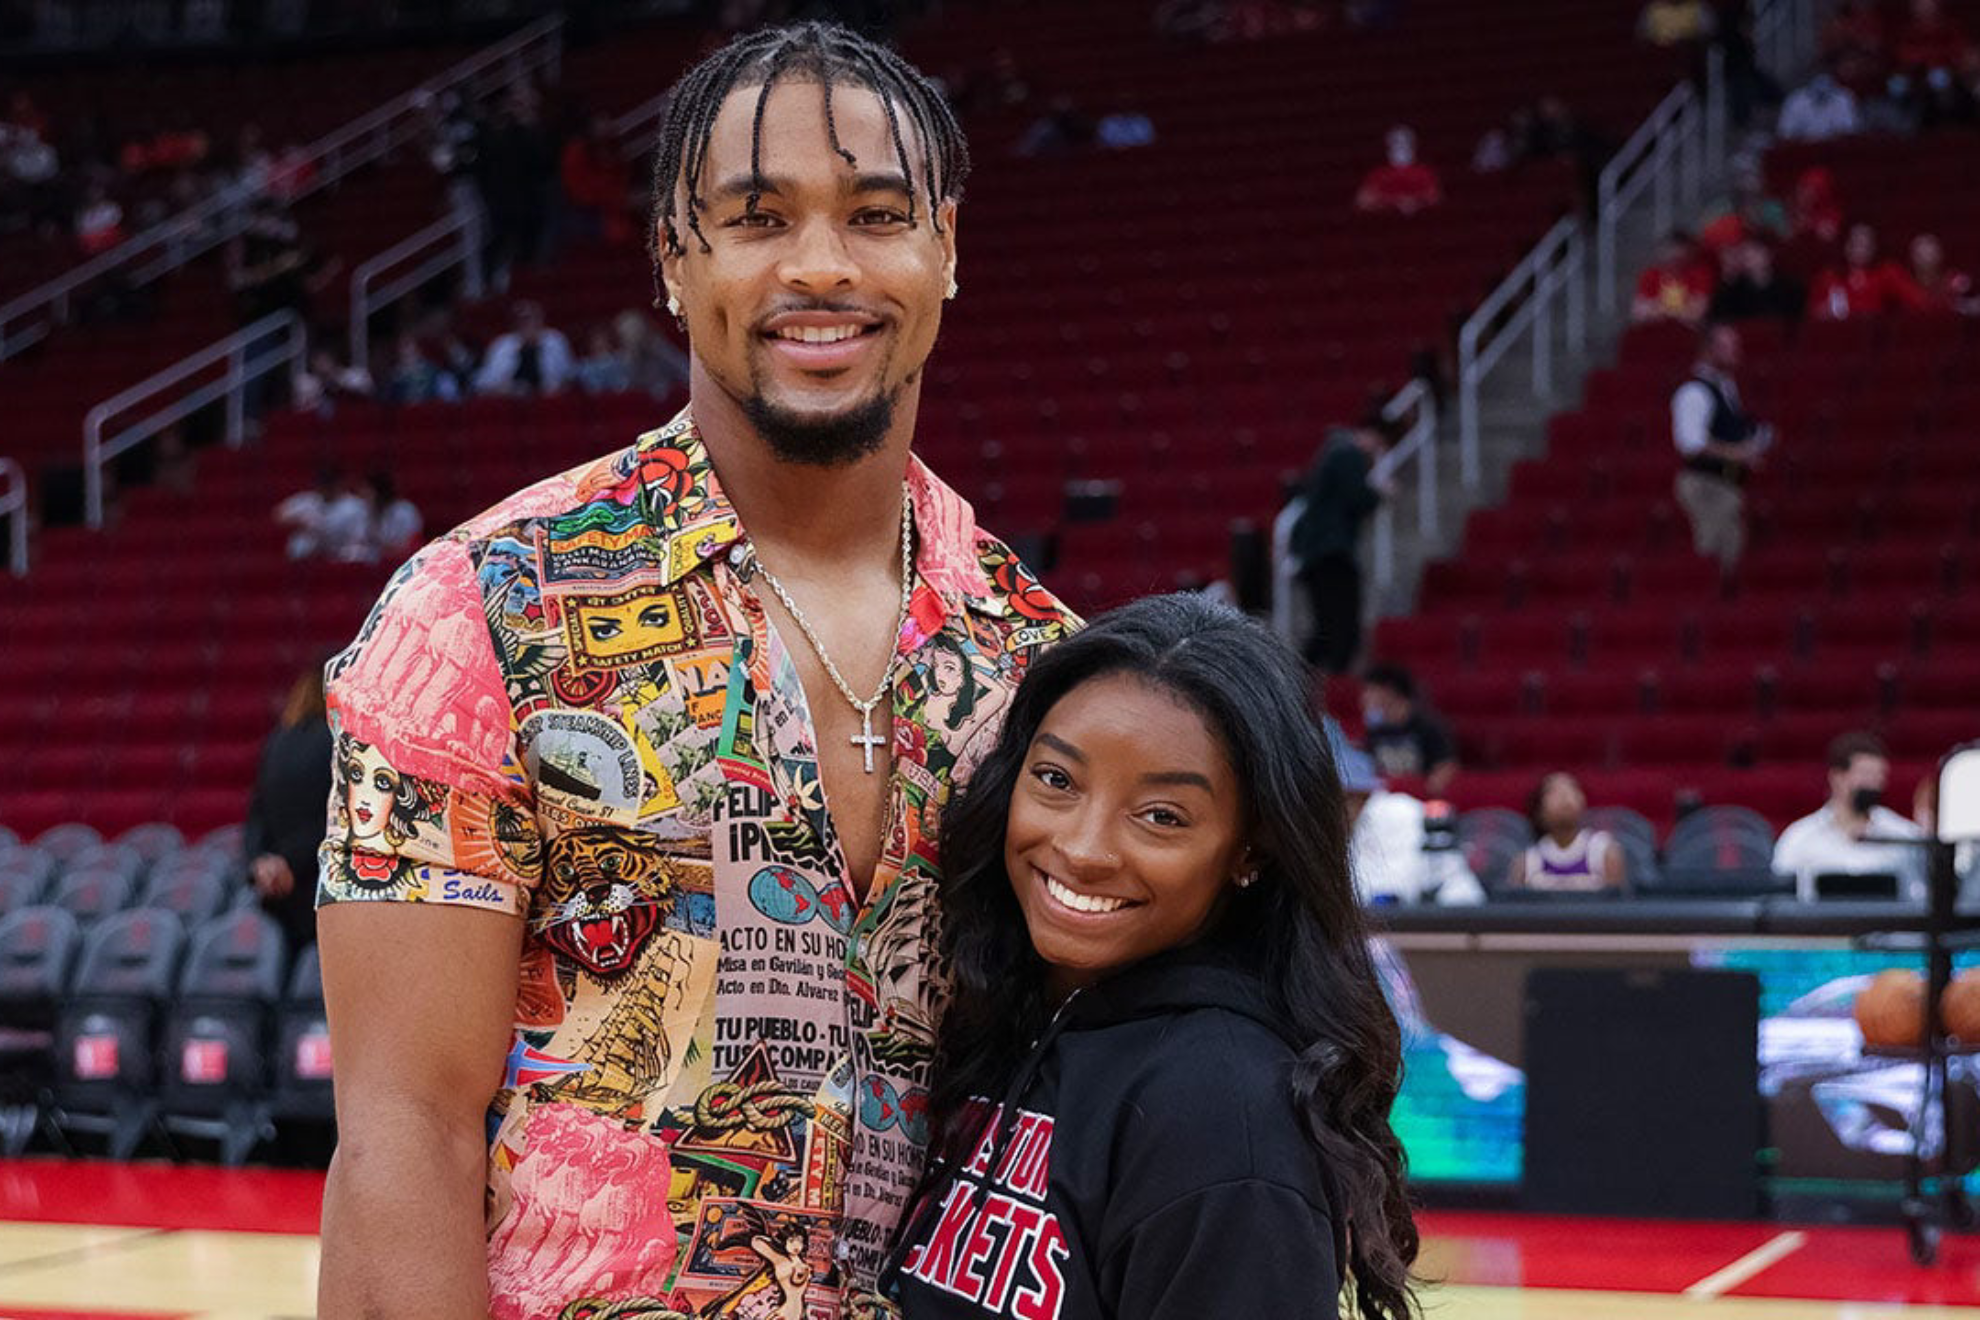 Jonathan Owens' tender and loving message to Simone Biles after her latest success